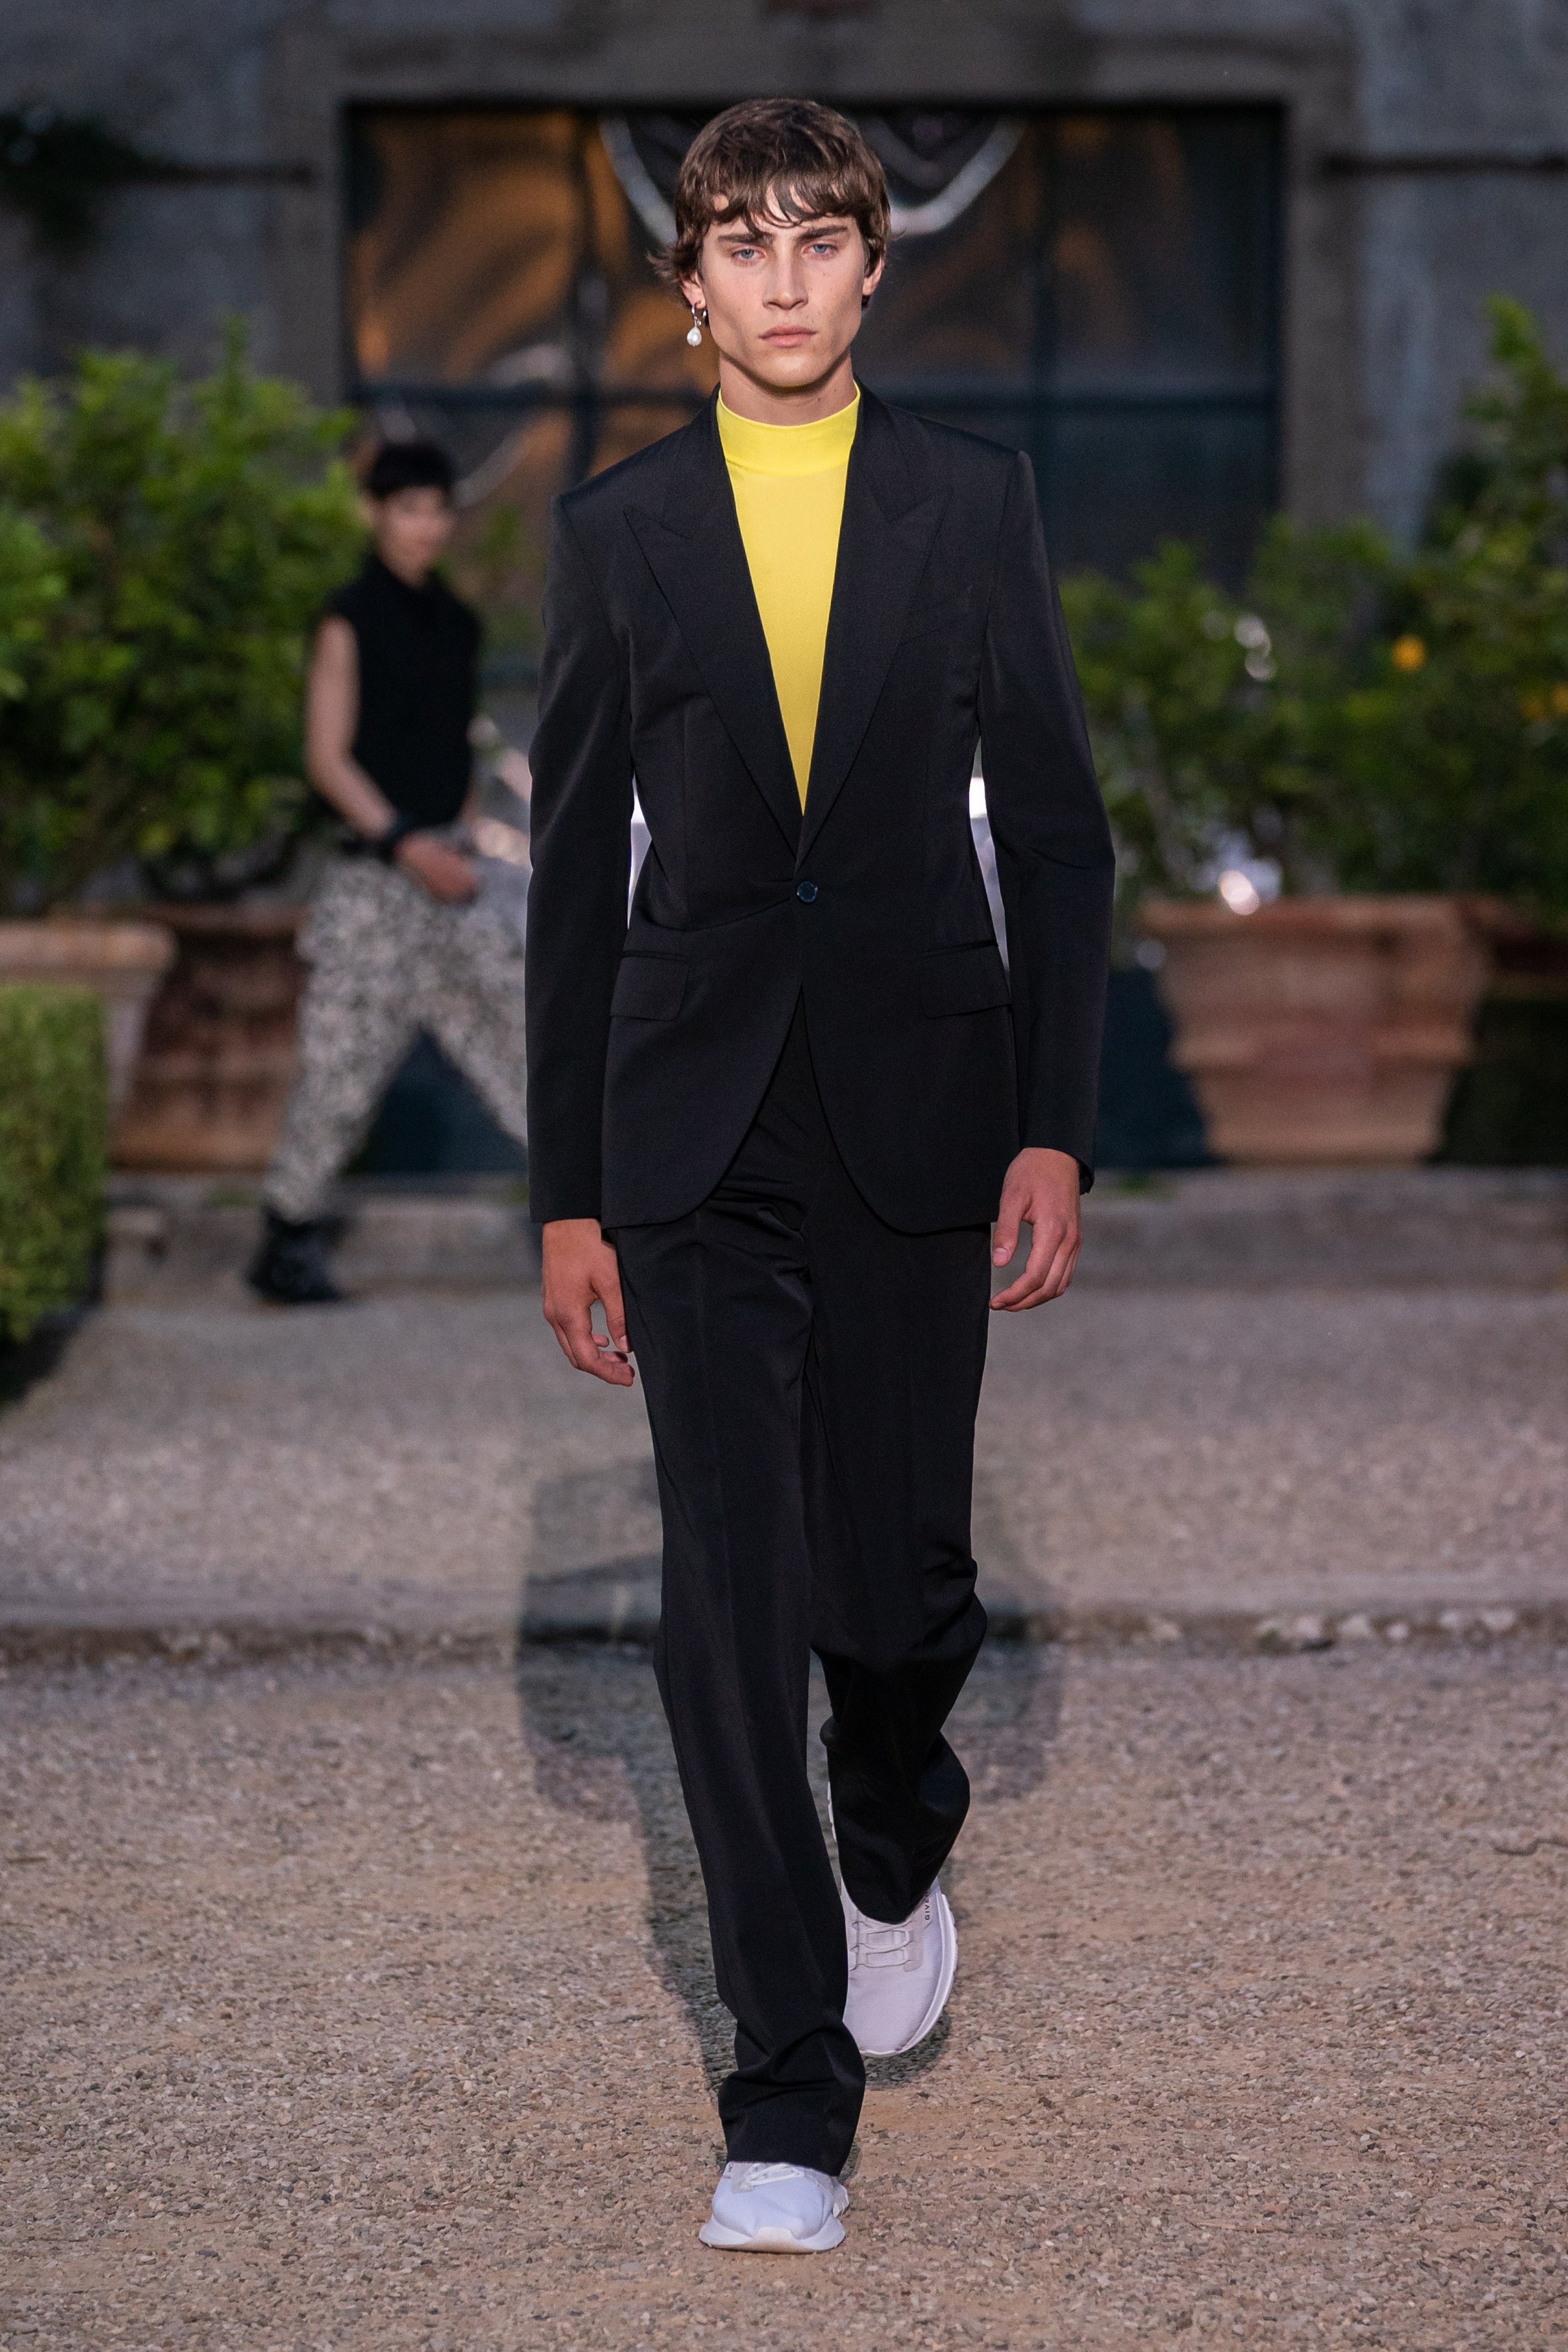 Behind_The_Blinds_Magazine_Givenchy_Men_SS20_Pitti_ALE0718.jpg